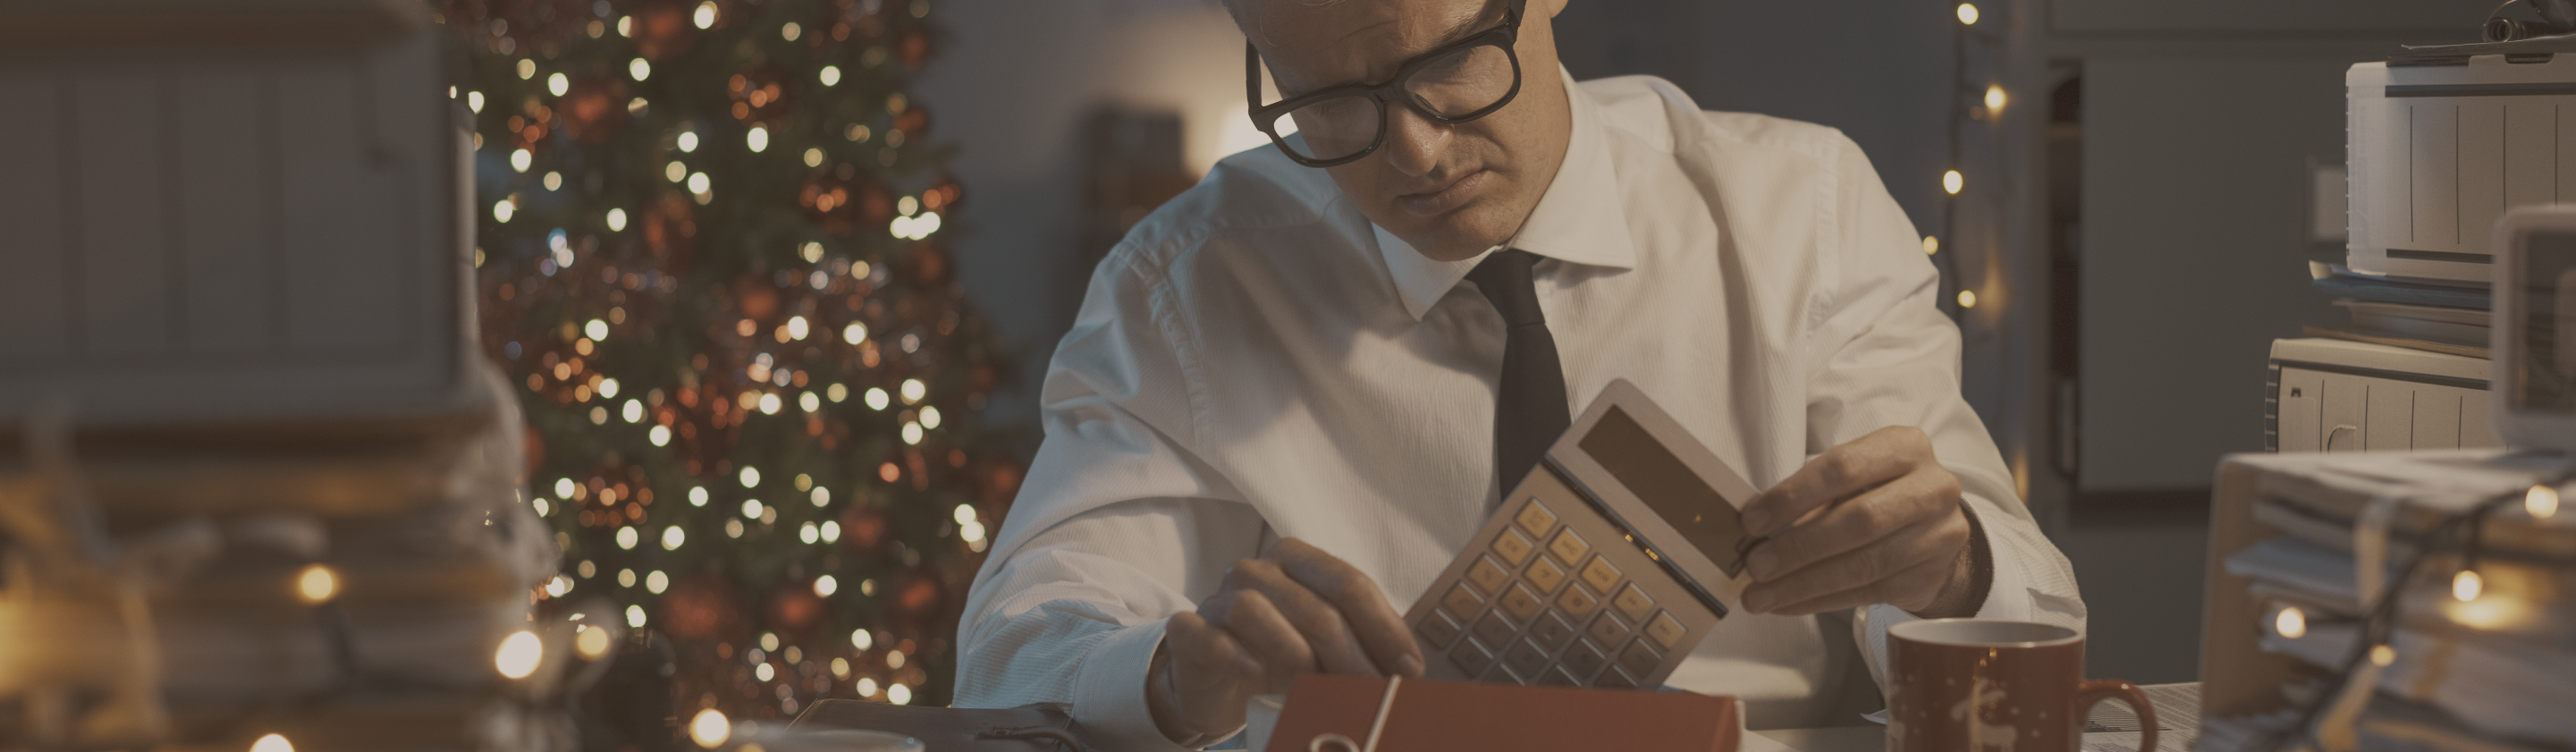 A Guide to Employee Appreciation Holiday Gifts That Fall Within Budget 